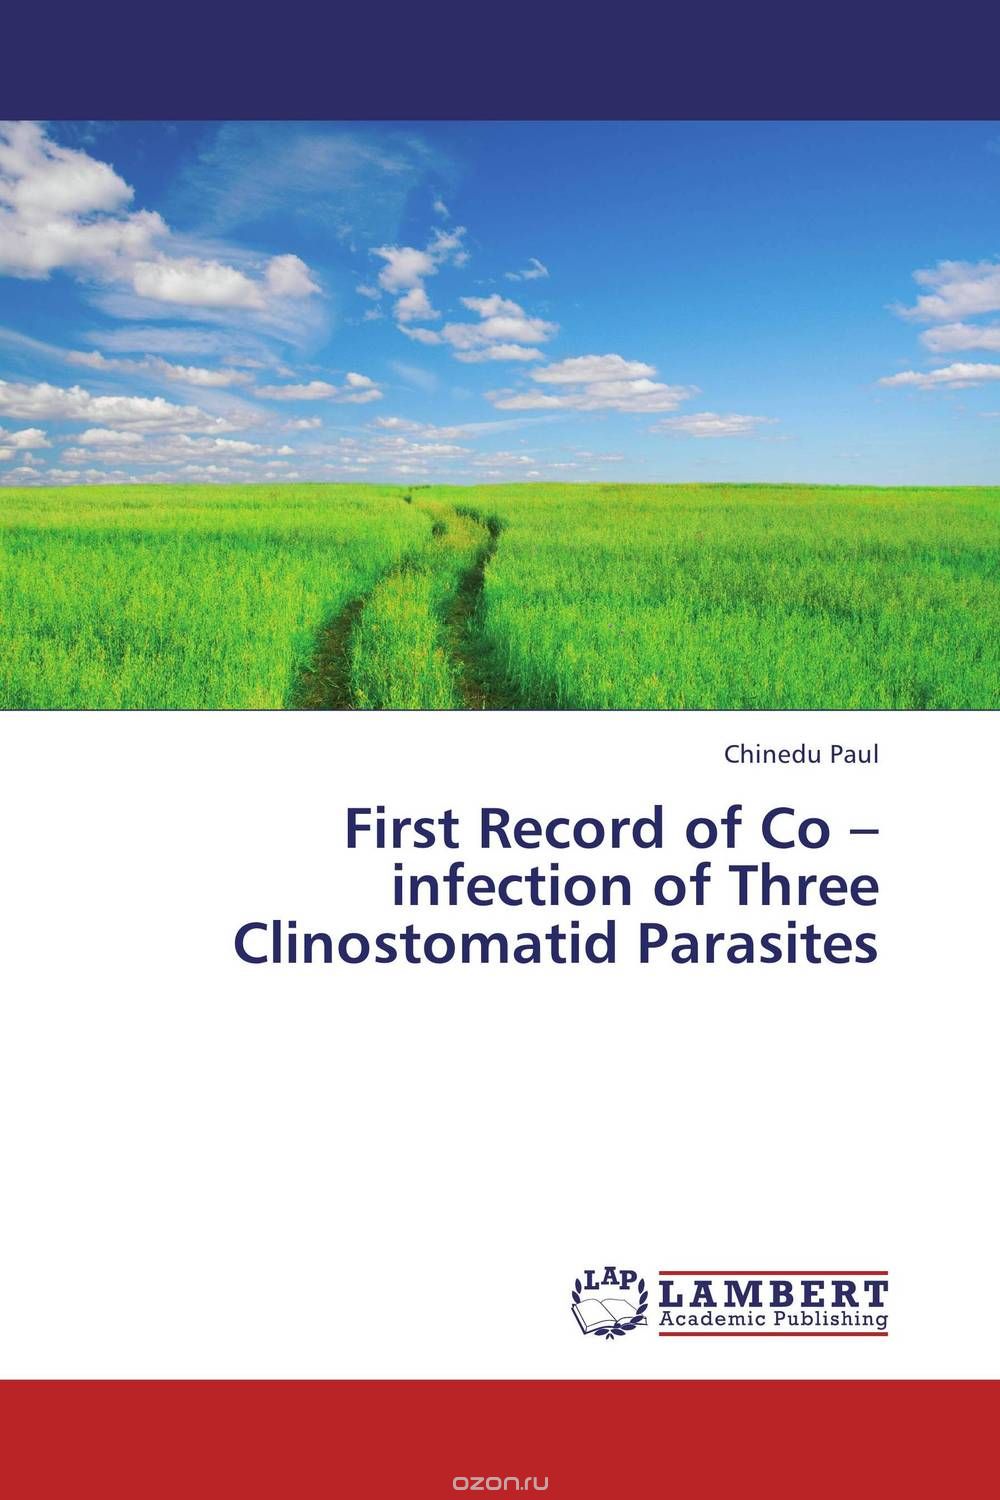 First Record of Co – infection of Three Clinostomatid Parasites